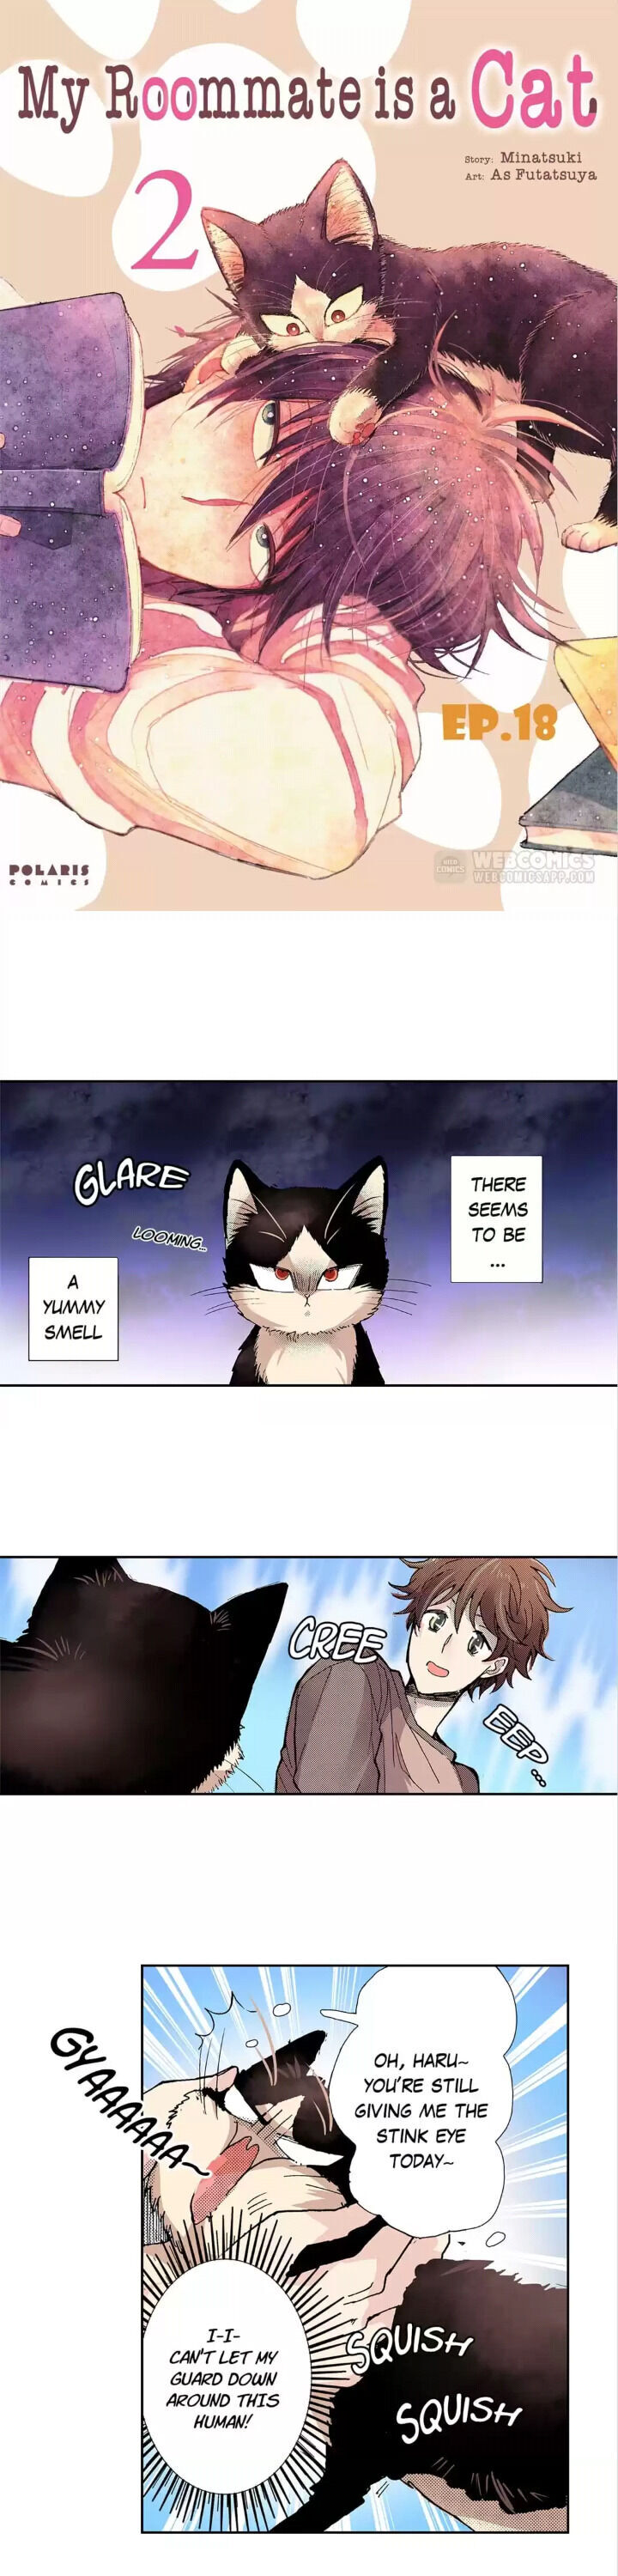 My Roommate Is A Cat - Page 1